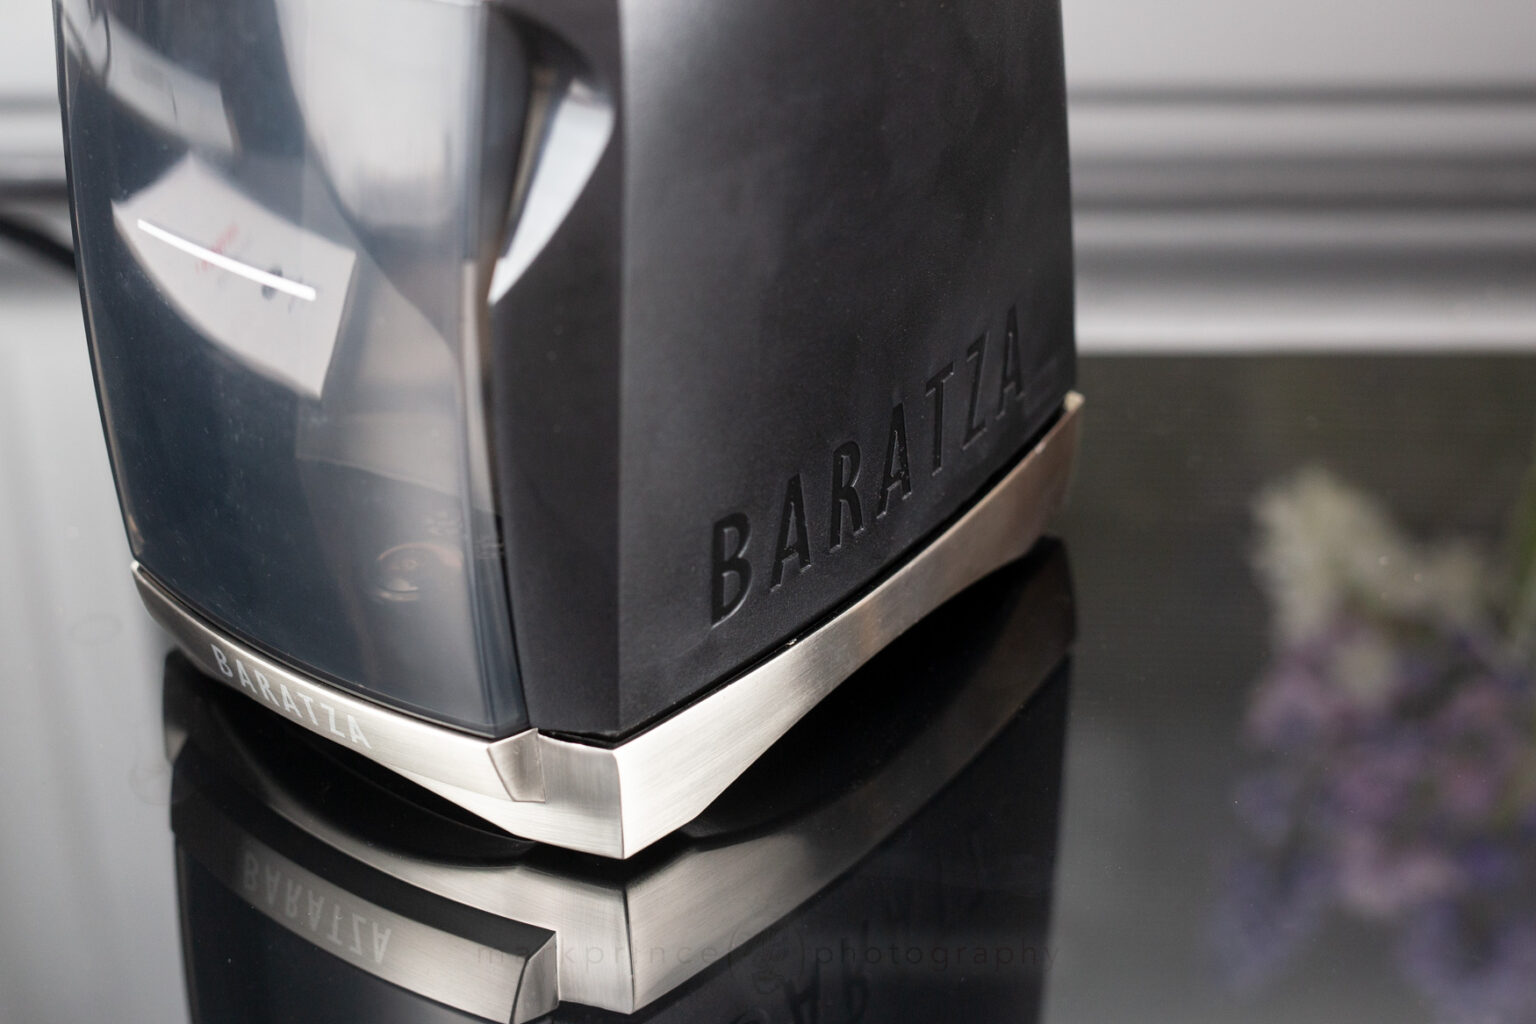 Baratza is doing more branding with the new Virtuoso+, a subtle "cut out" of their company name on the right side.